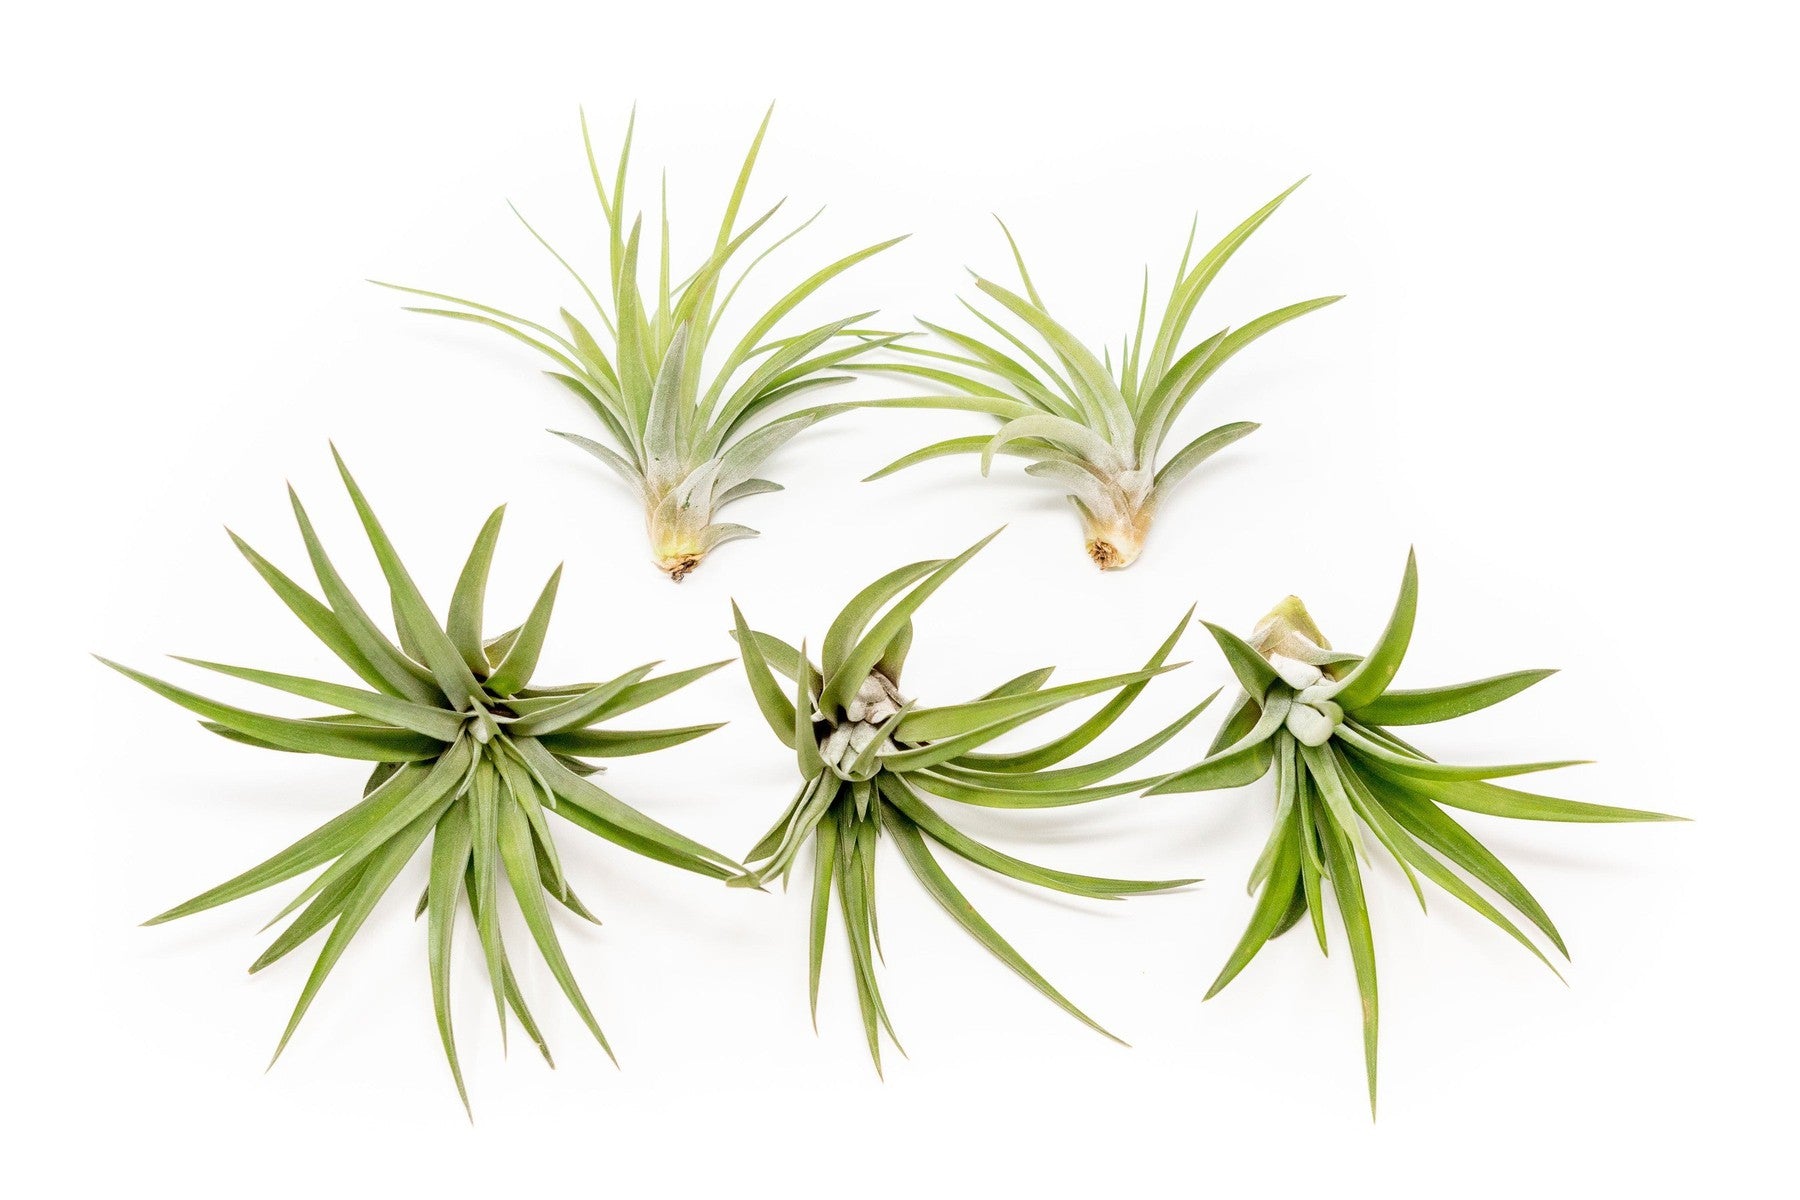 SALE - Large Tillandsia Velutina Air Plants - Set of 5 or 10 - 50% Off-airplant-The Succulent Source